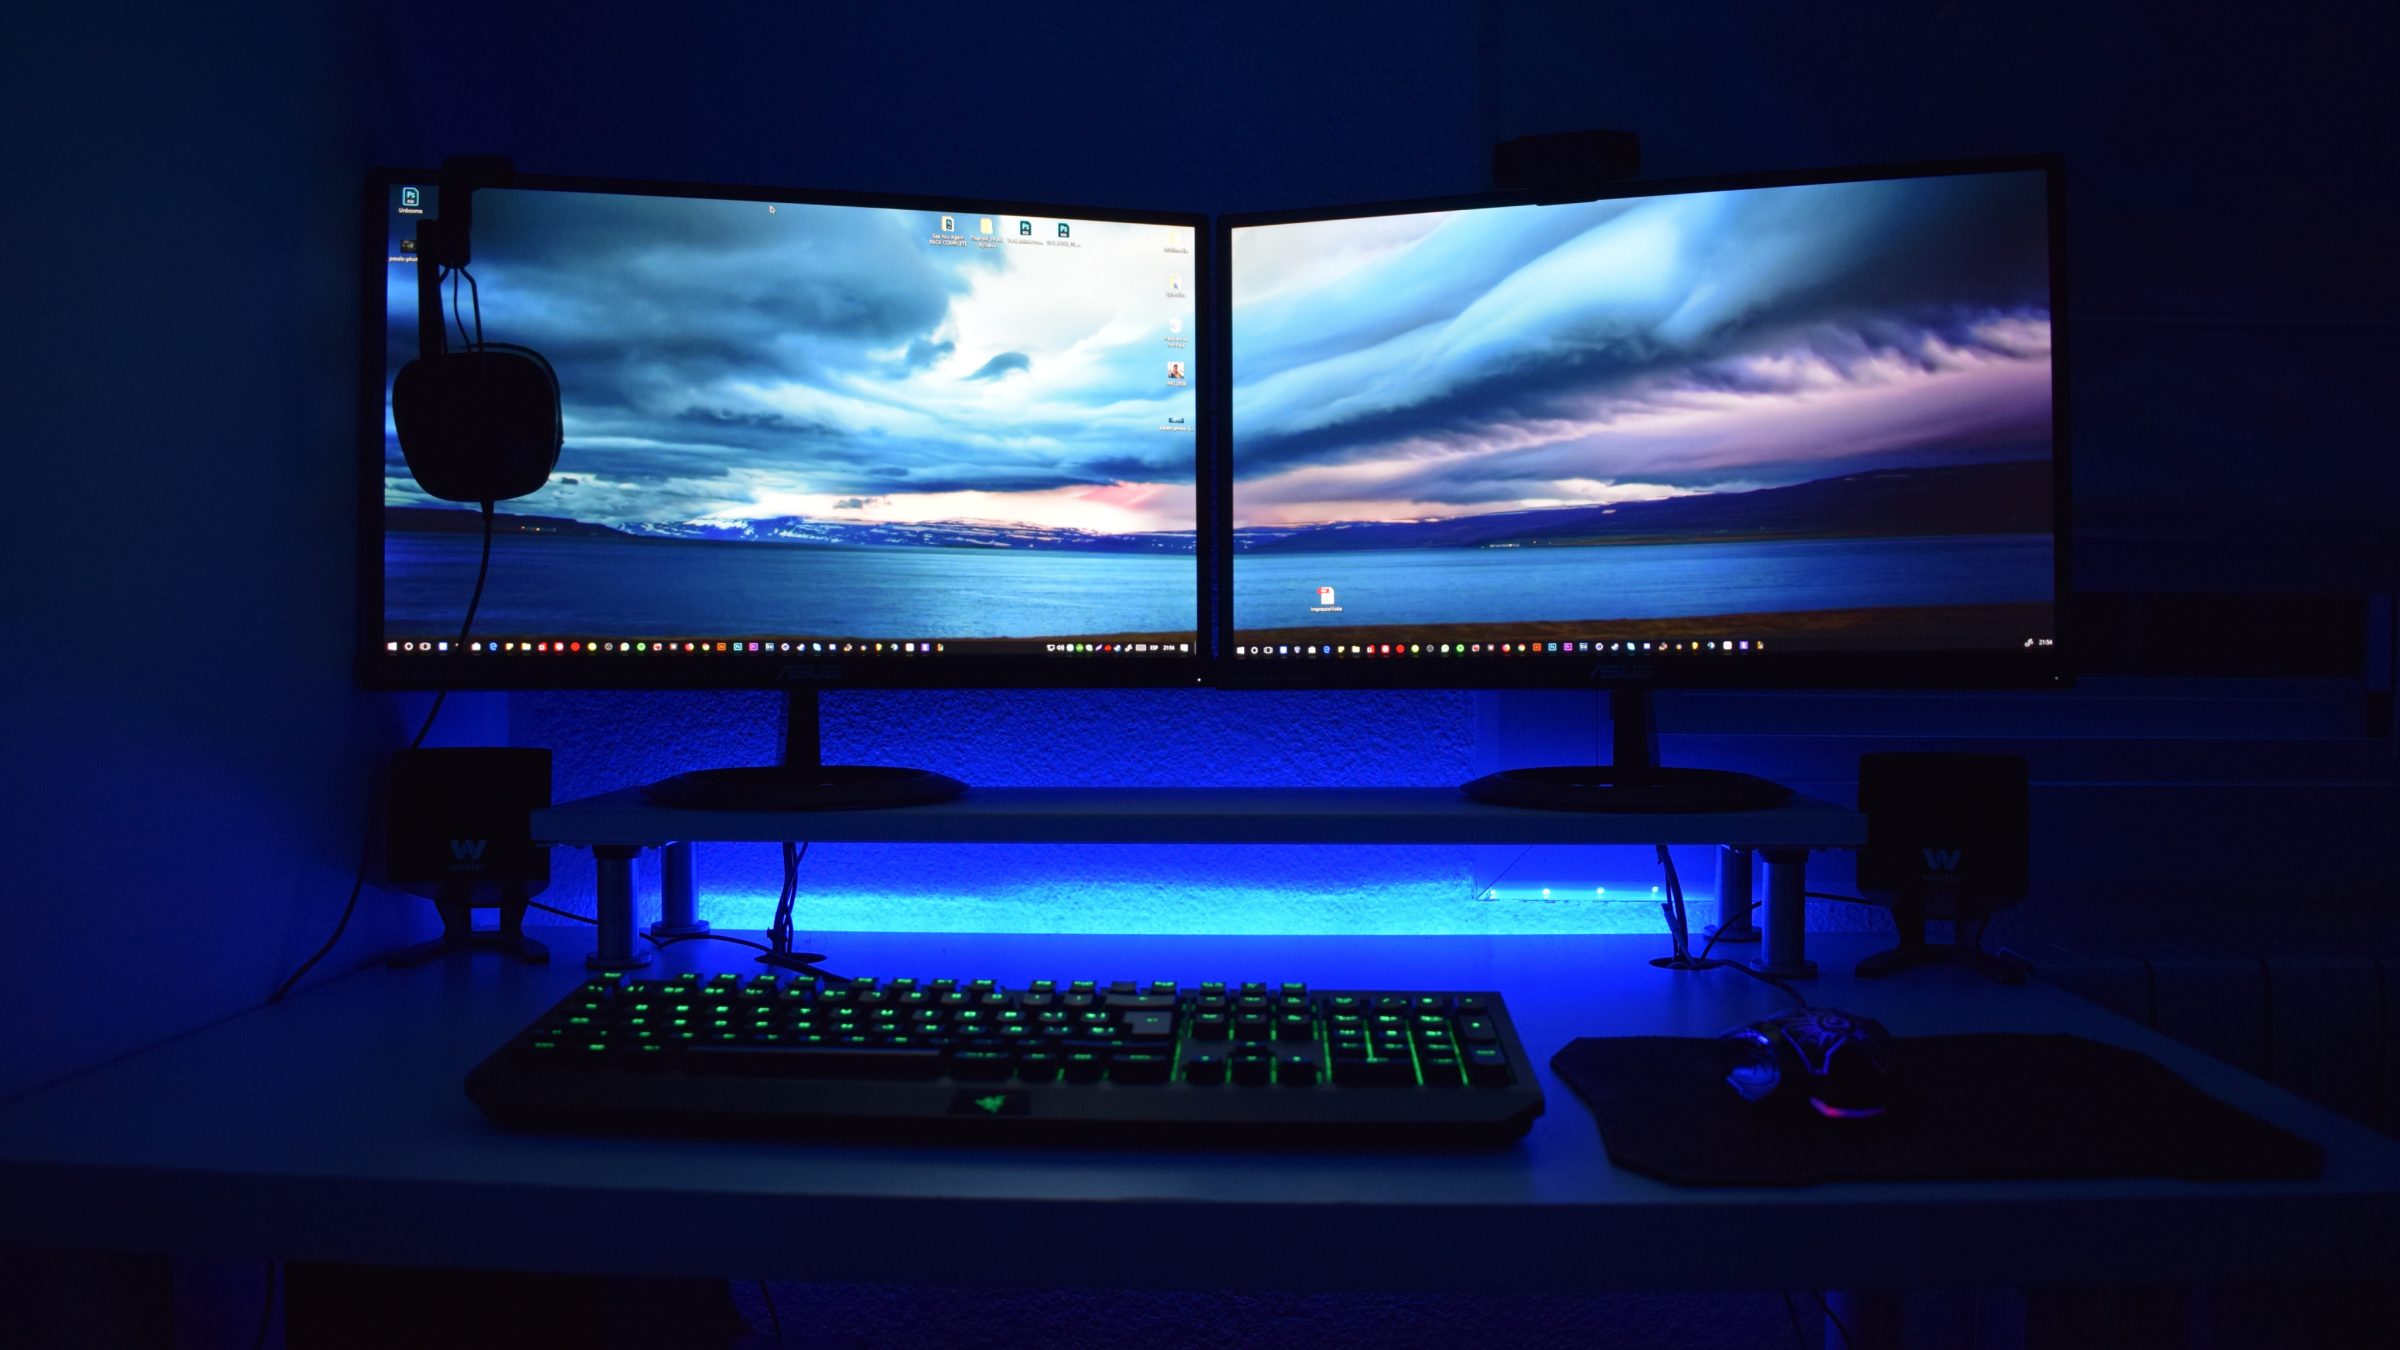 The Beginner's Guide to Creating your Dream Gaming Setup